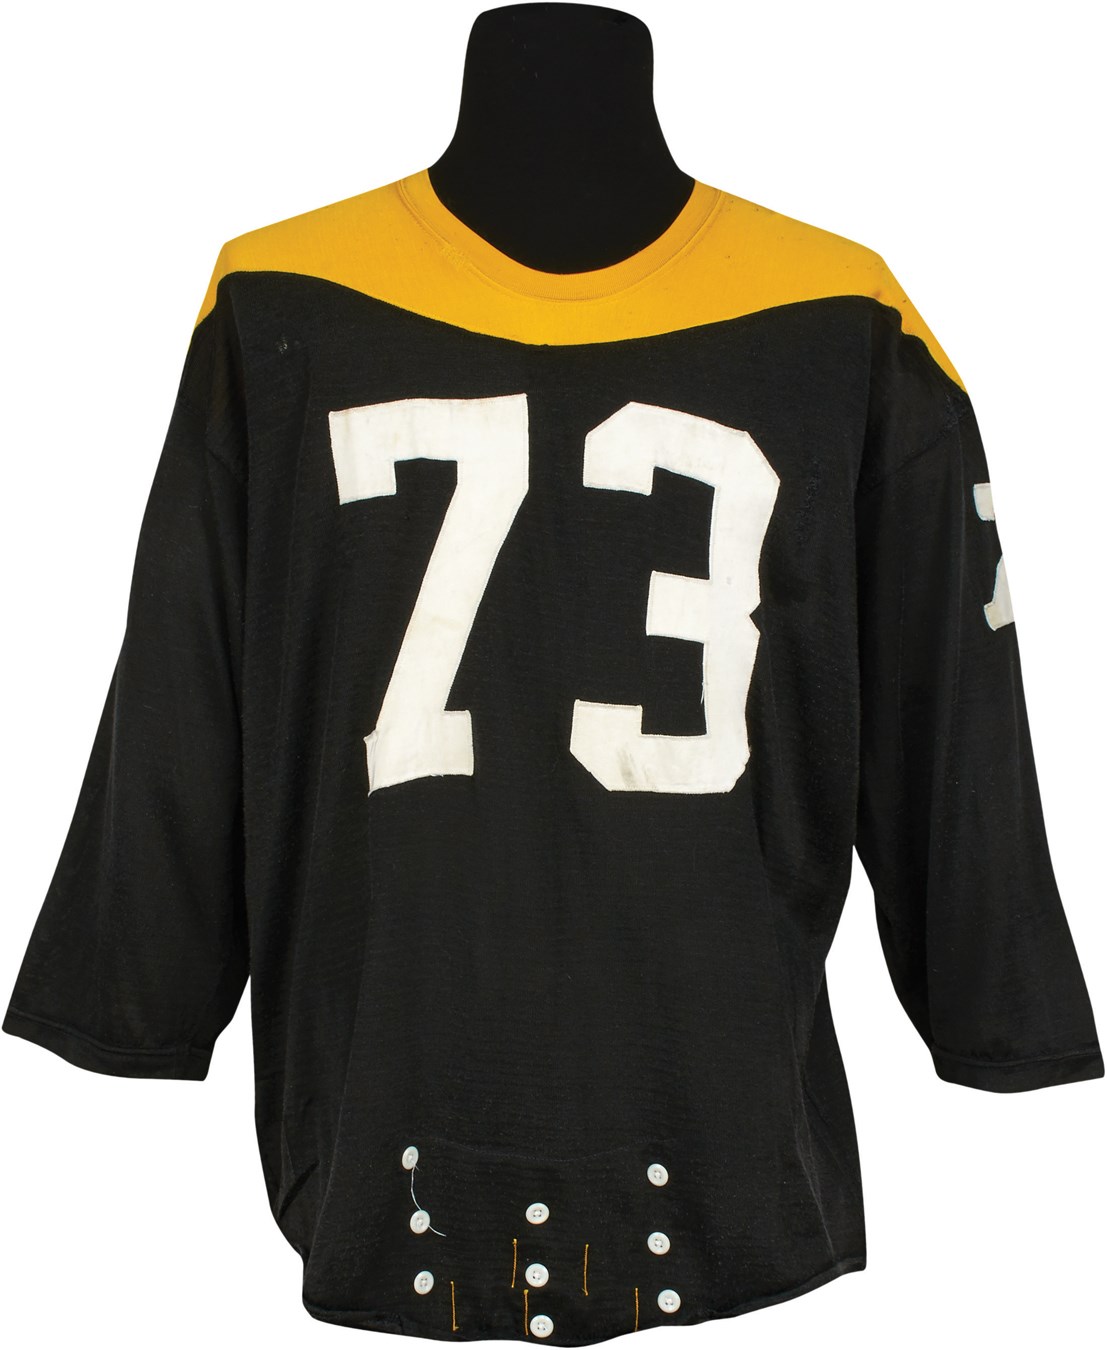 The Pittsburgh Steelers Game Worn Jersey Archive - 1966-67 Ray Mansfield Pittsburgh Steelers Game Worn Jersey (Photomatched)